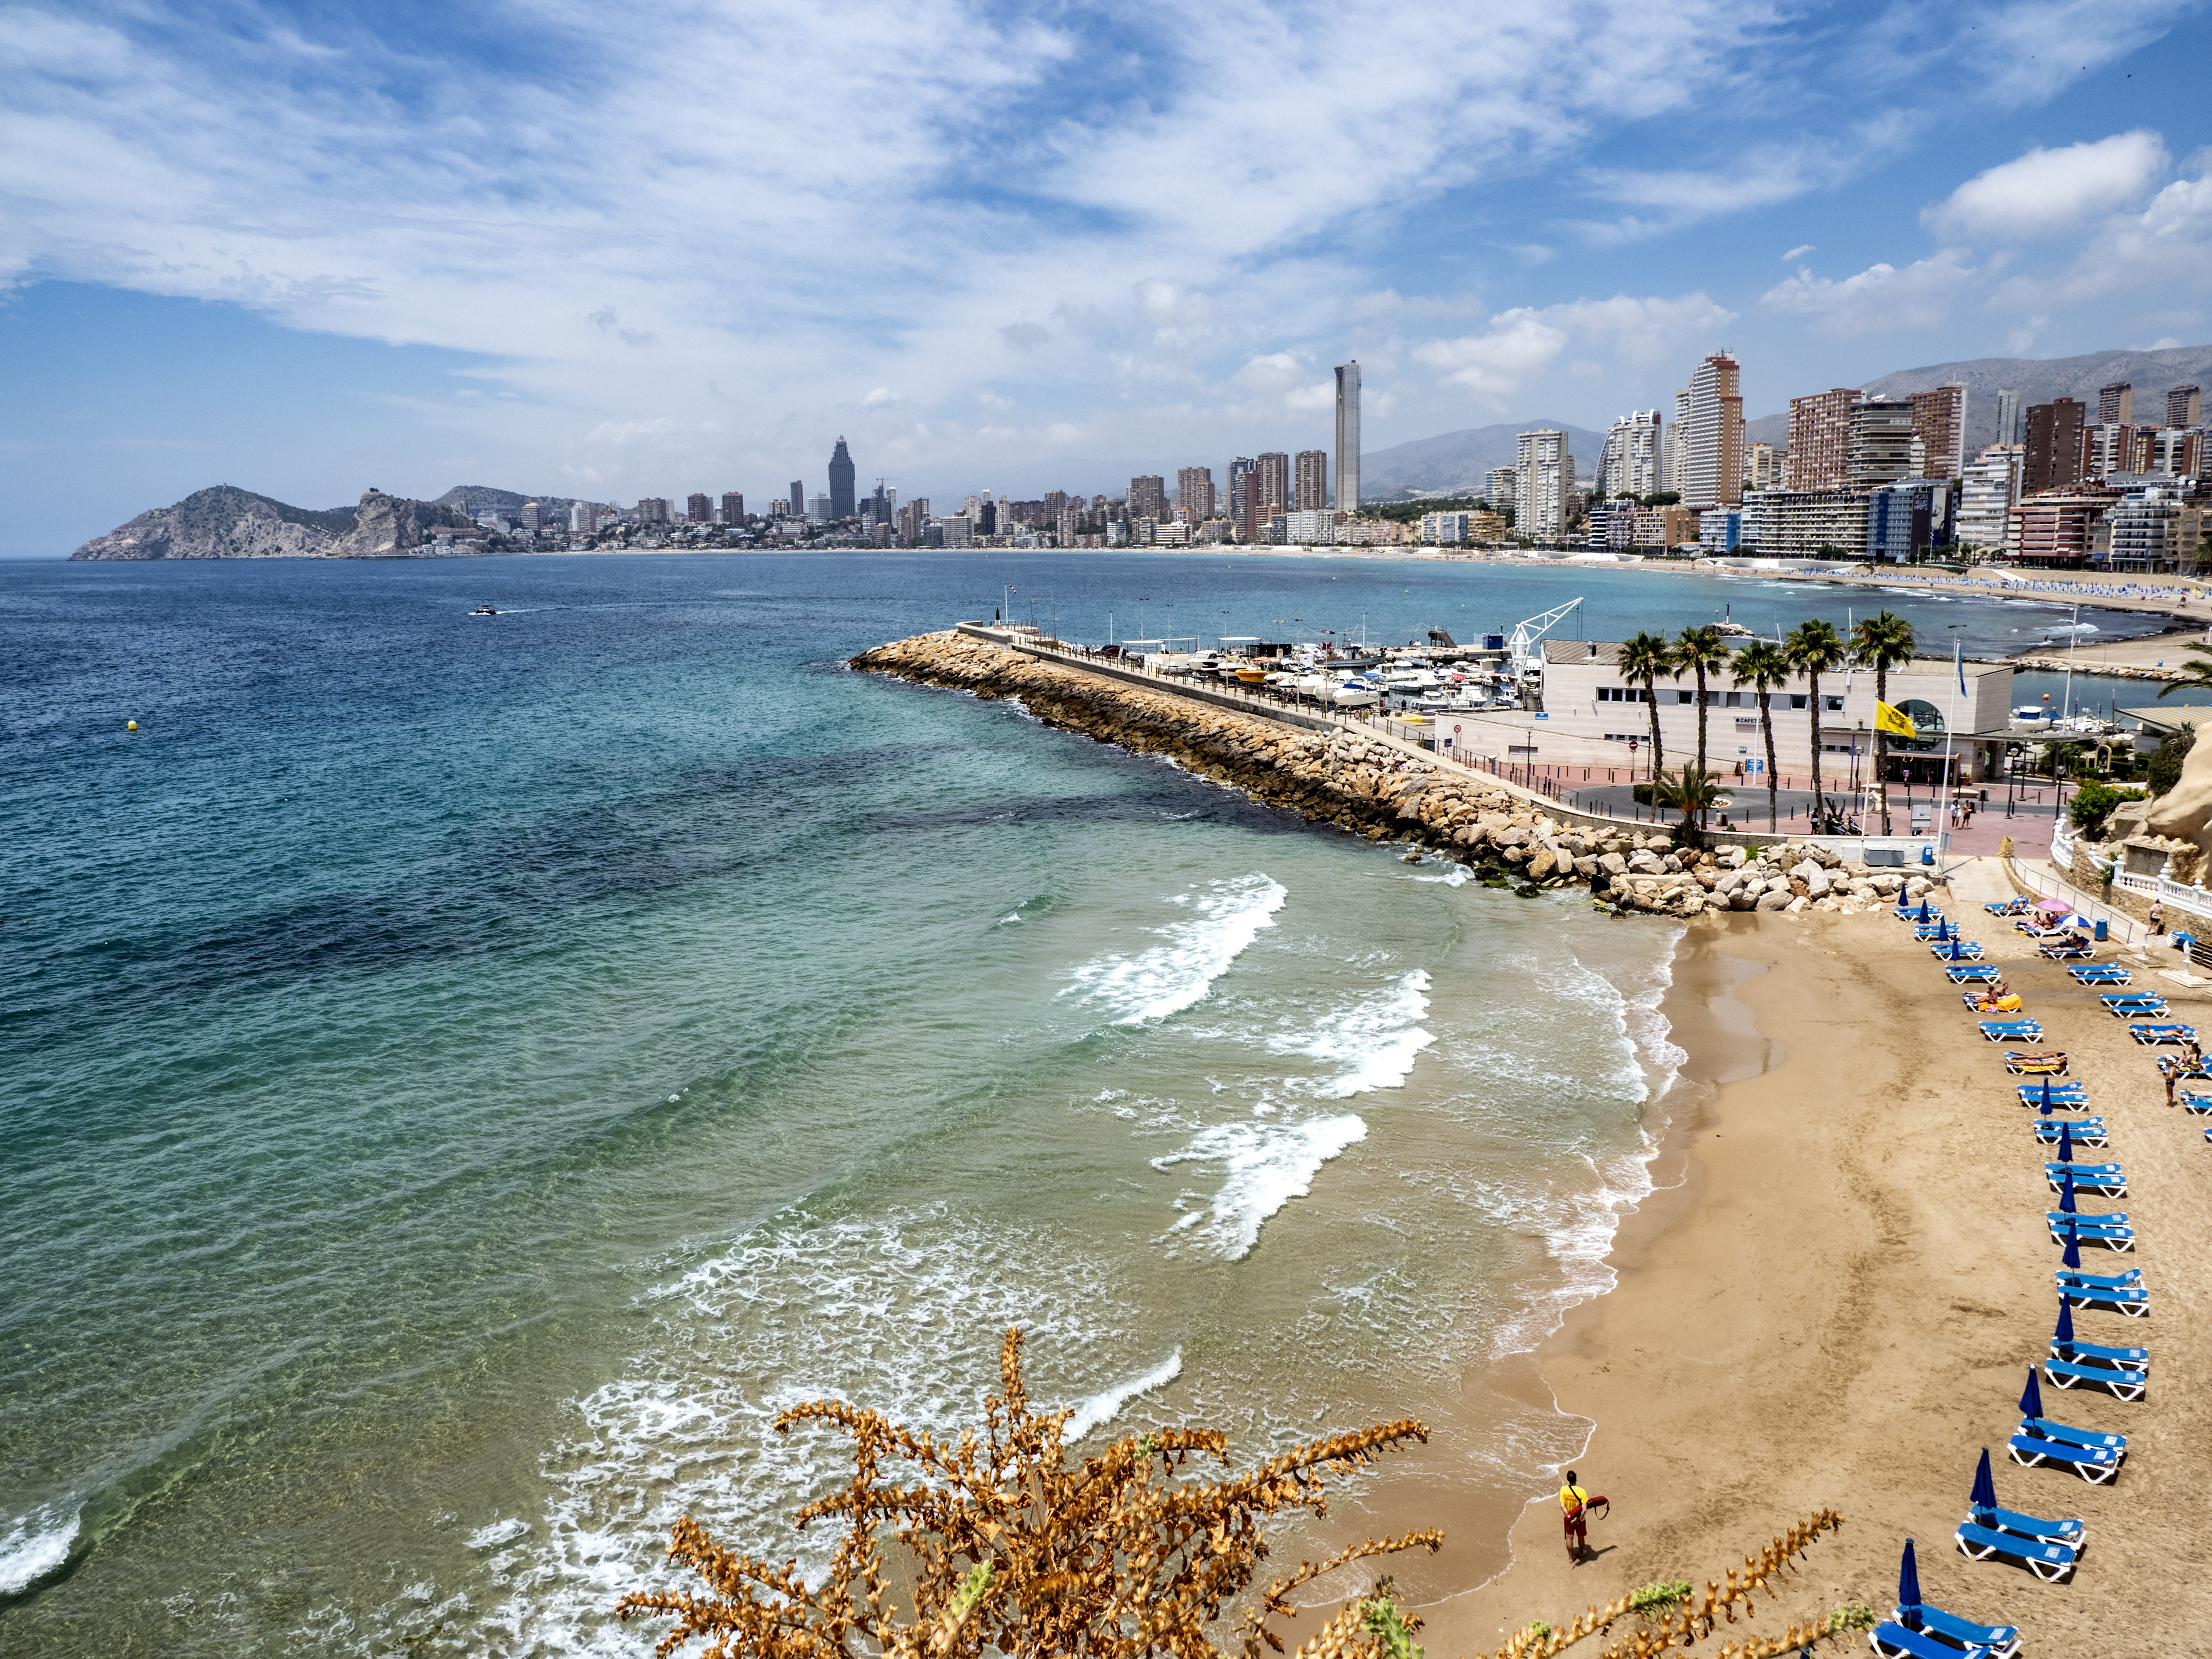 Benidorm is a budget-friendly destination to visit this spring